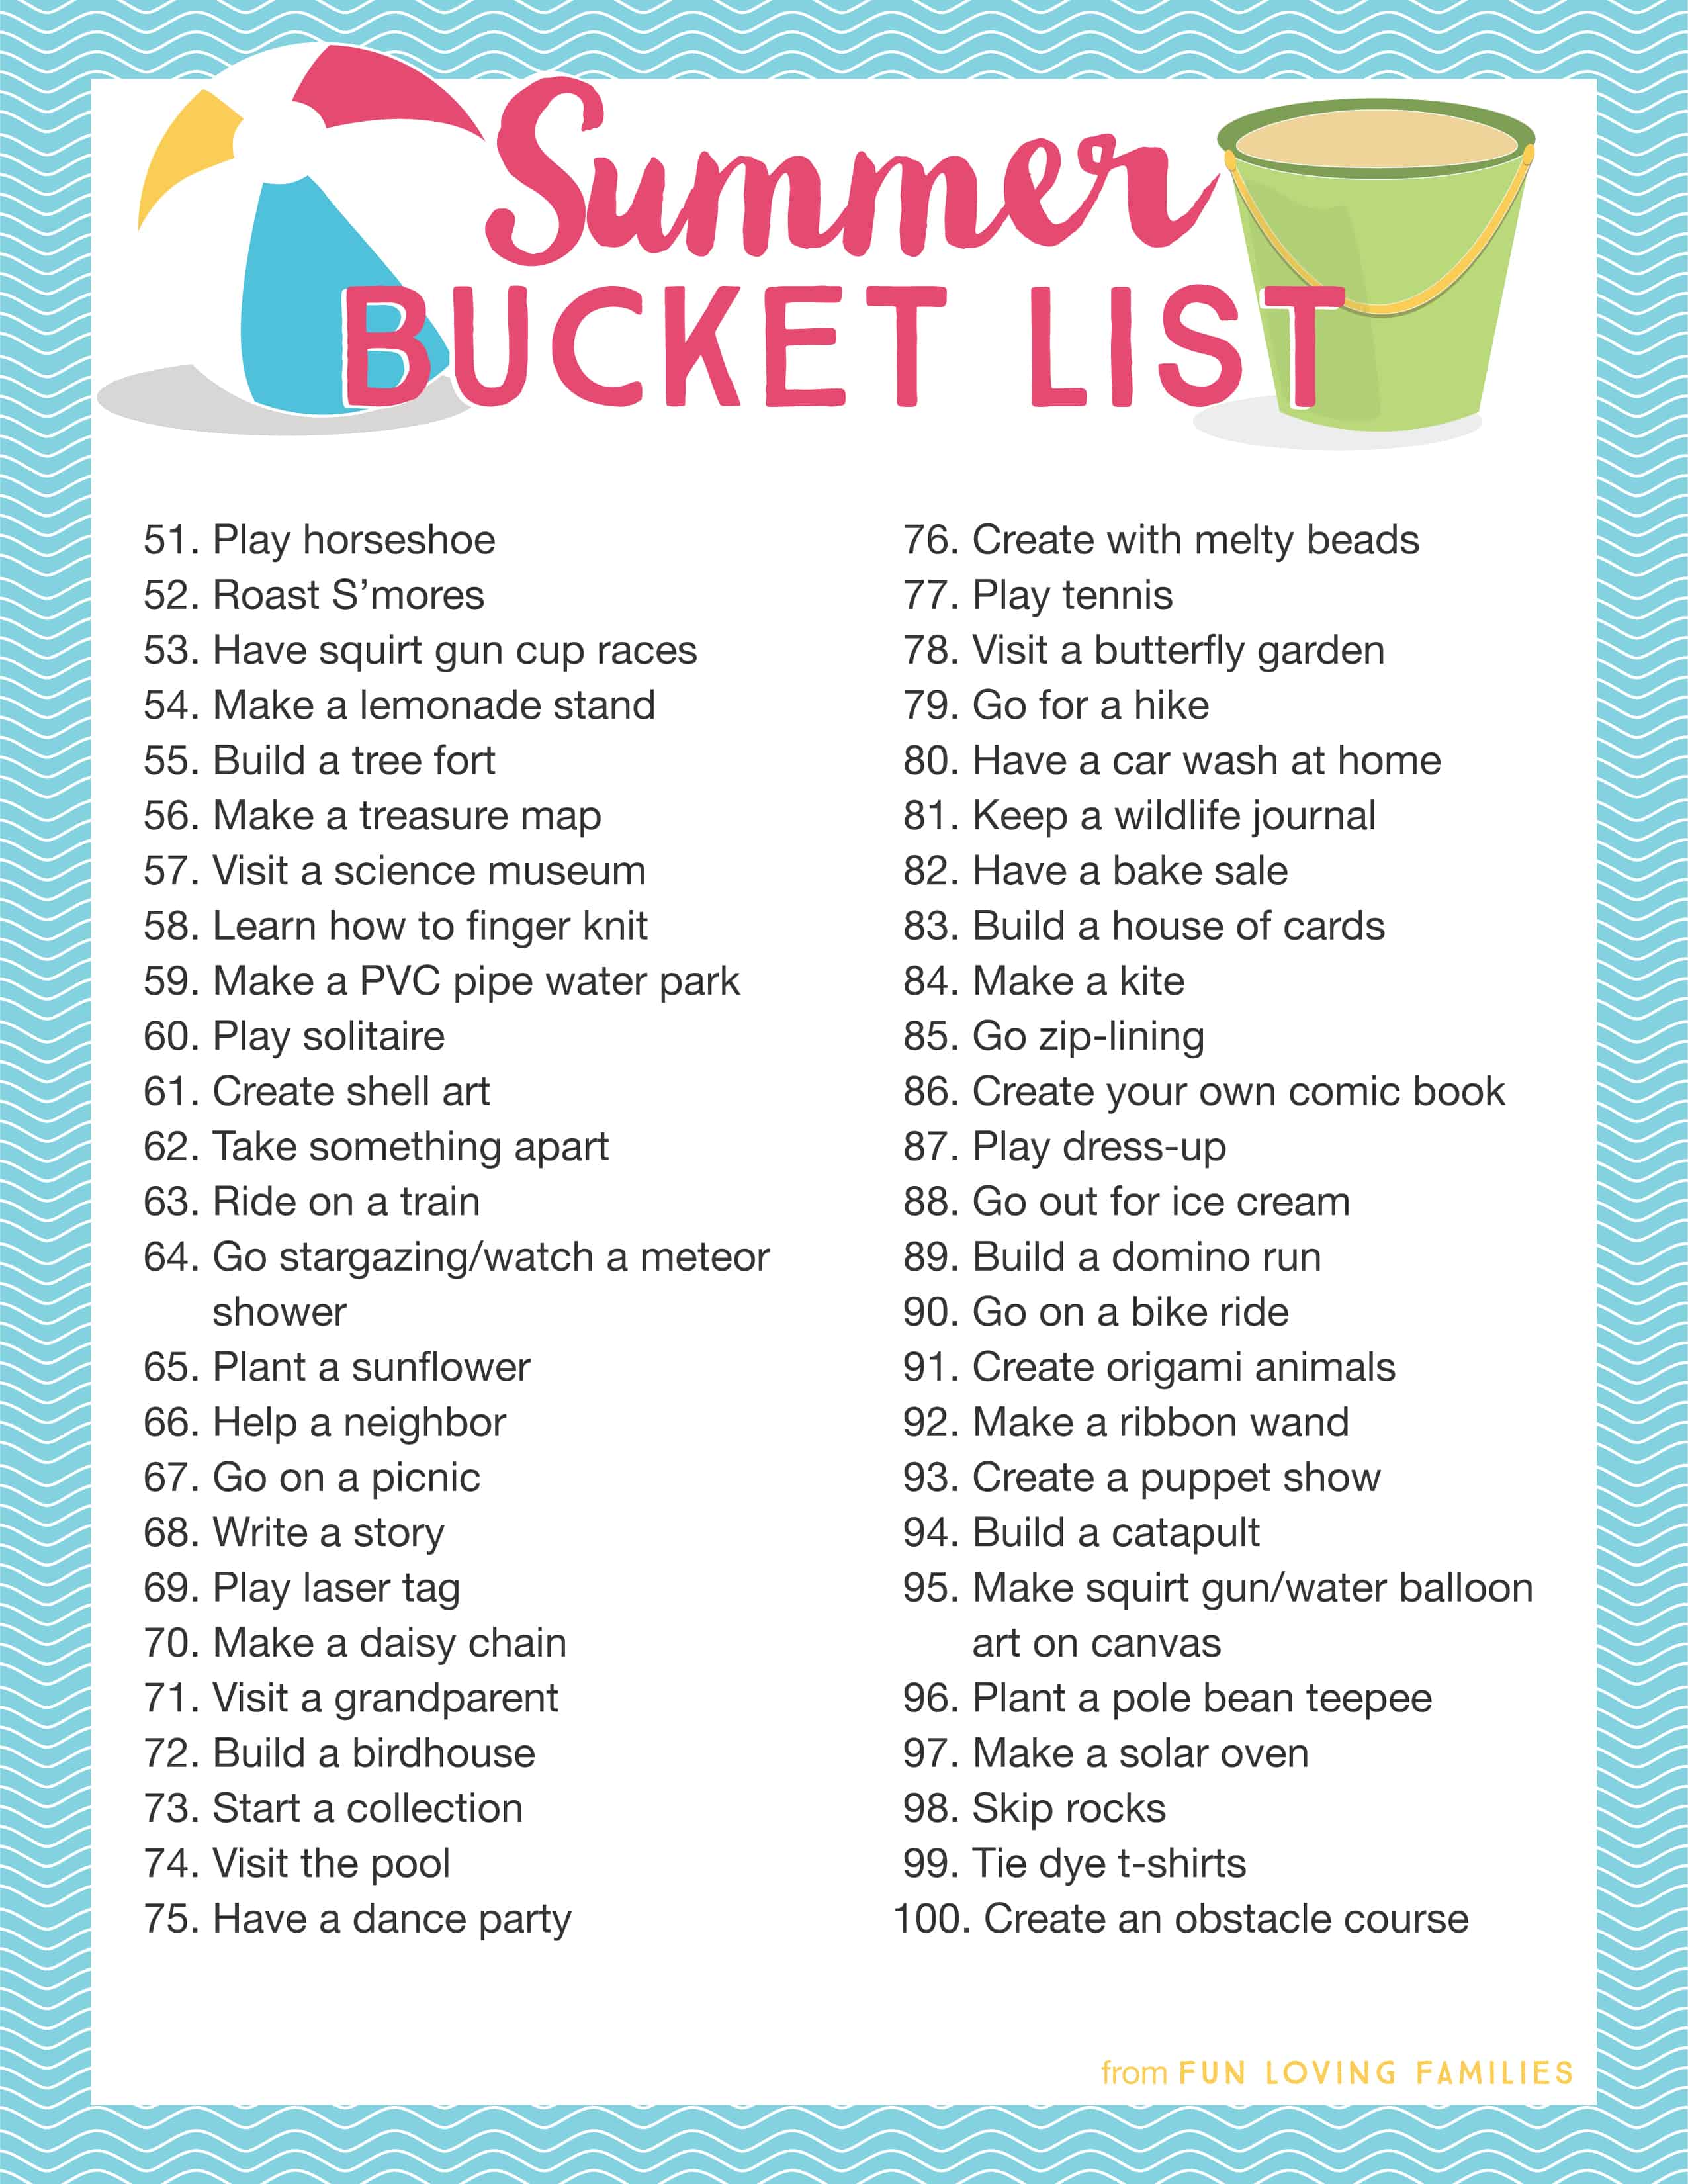 Click through to see all 100 Summer Bucket List ideas for families. Then, create your own Summer fun list with our free Summer planning printables.